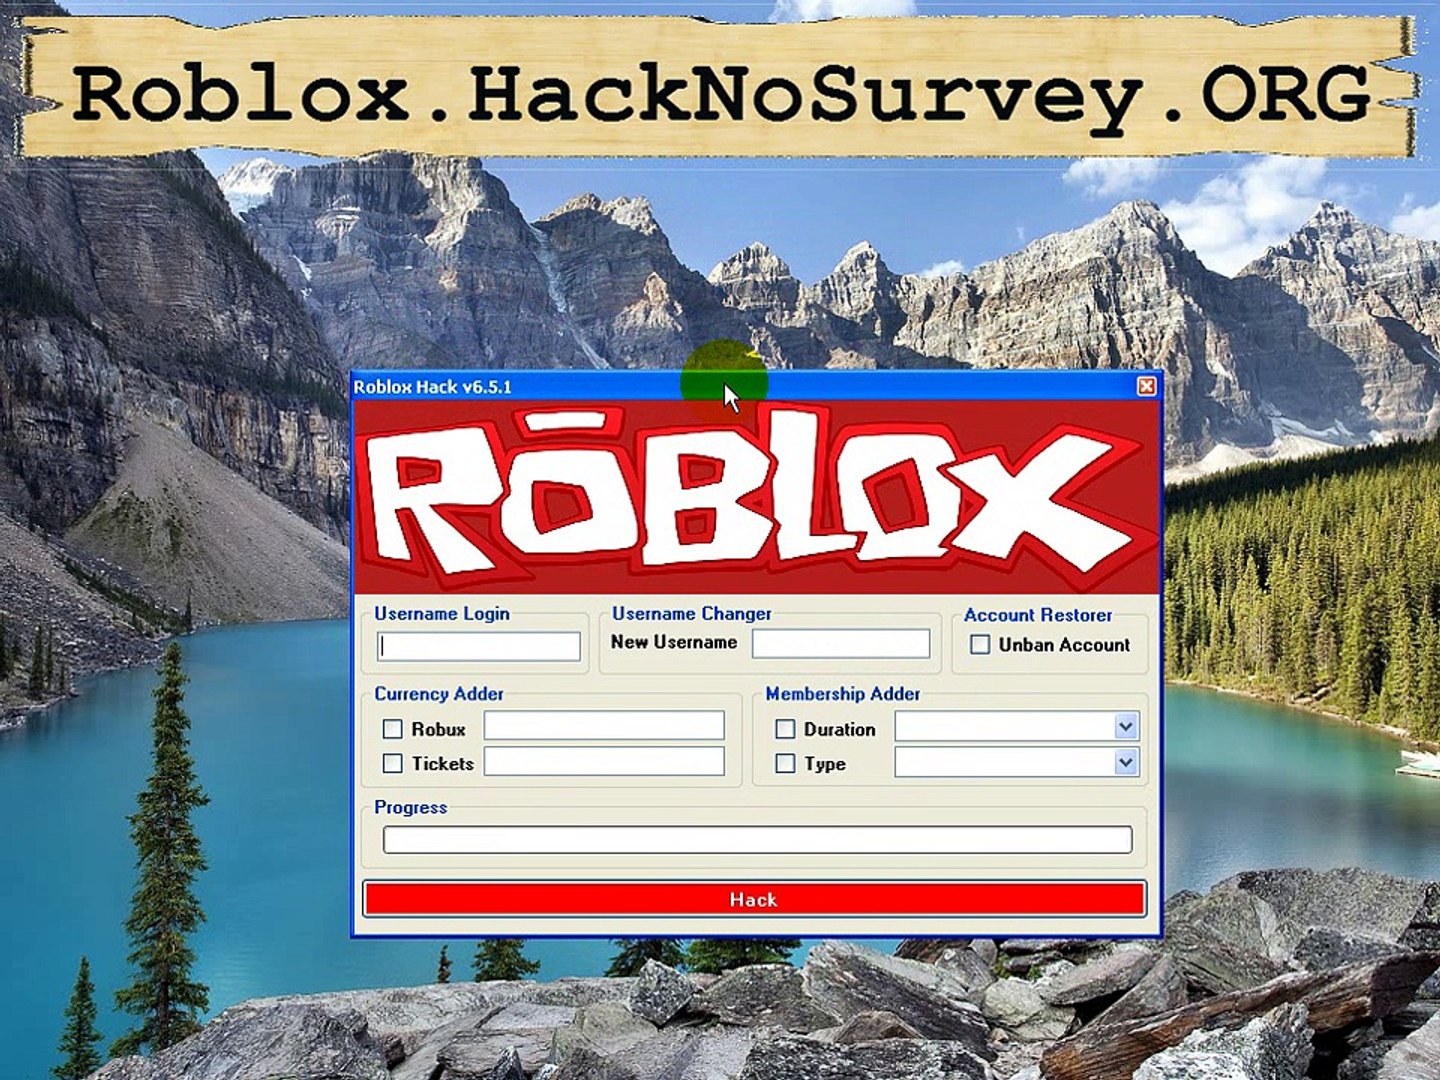 Roblox Cheats Engine Final 2015 For Unlimited Robux Or Tix No Survey 2015 - roblox hack 2015 how to get unlimited robux and tix 2015